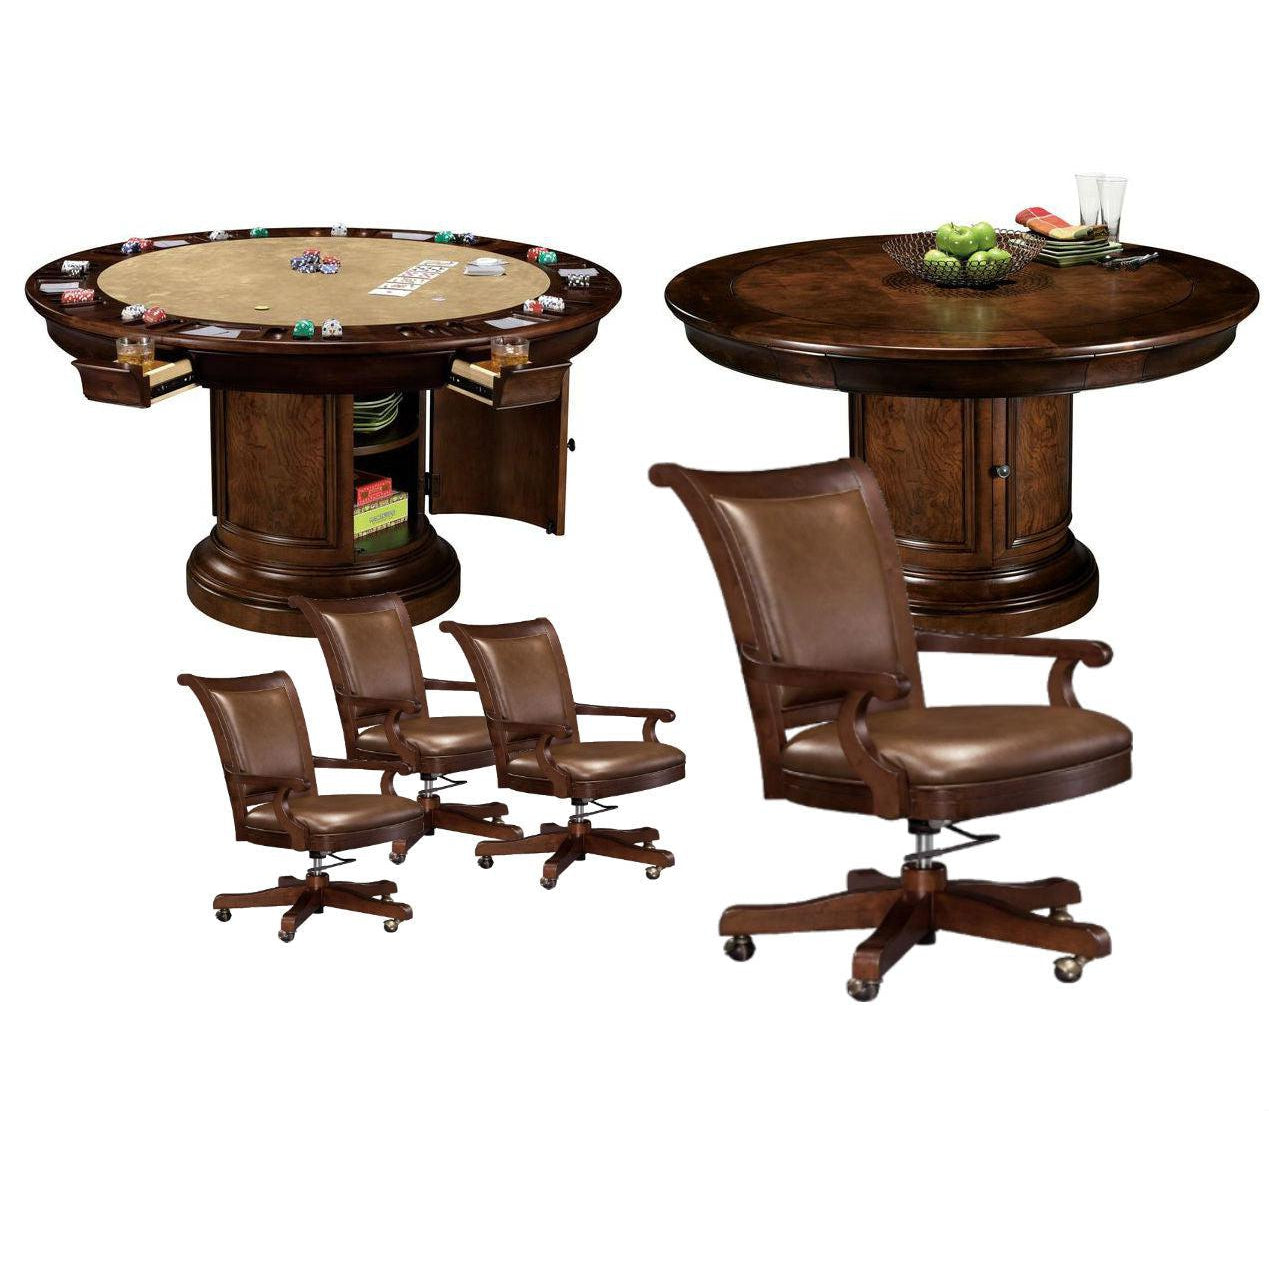 Howard Miller Poker and Dining Table Ithaca set with matching chairs-AMERICANA-POKER-TABLES